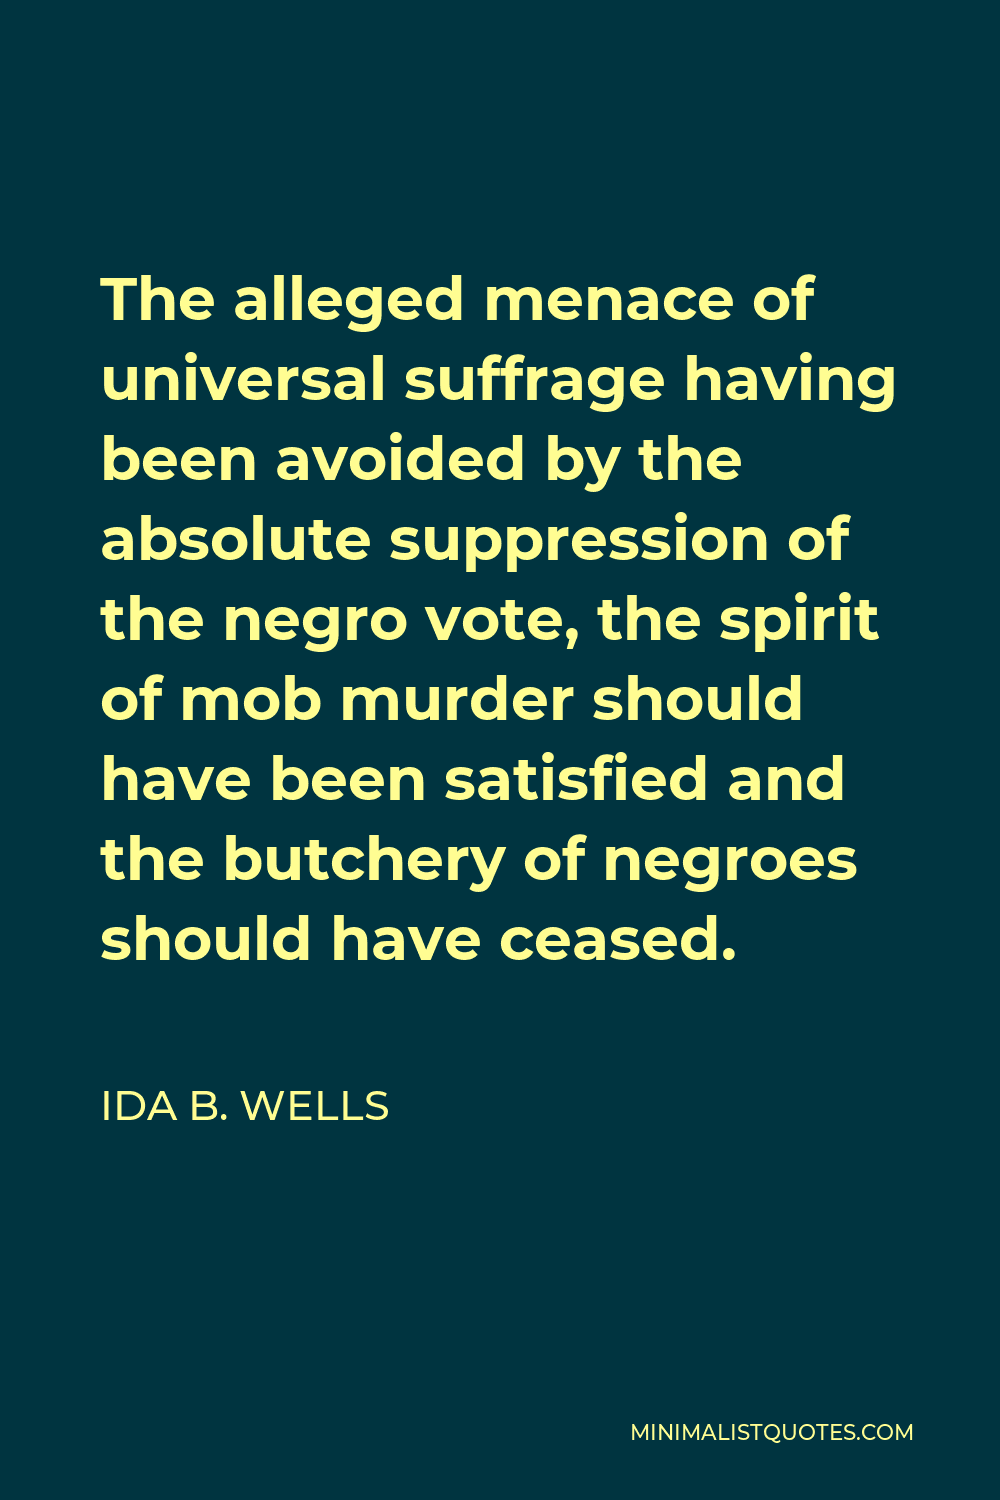 Ida B. Wells Quote - The alleged menace of universal suffrage having been avoided by the absolute suppression of the negro vote, the spirit of mob murder should have been satisfied and the butchery of negroes should have ceased.